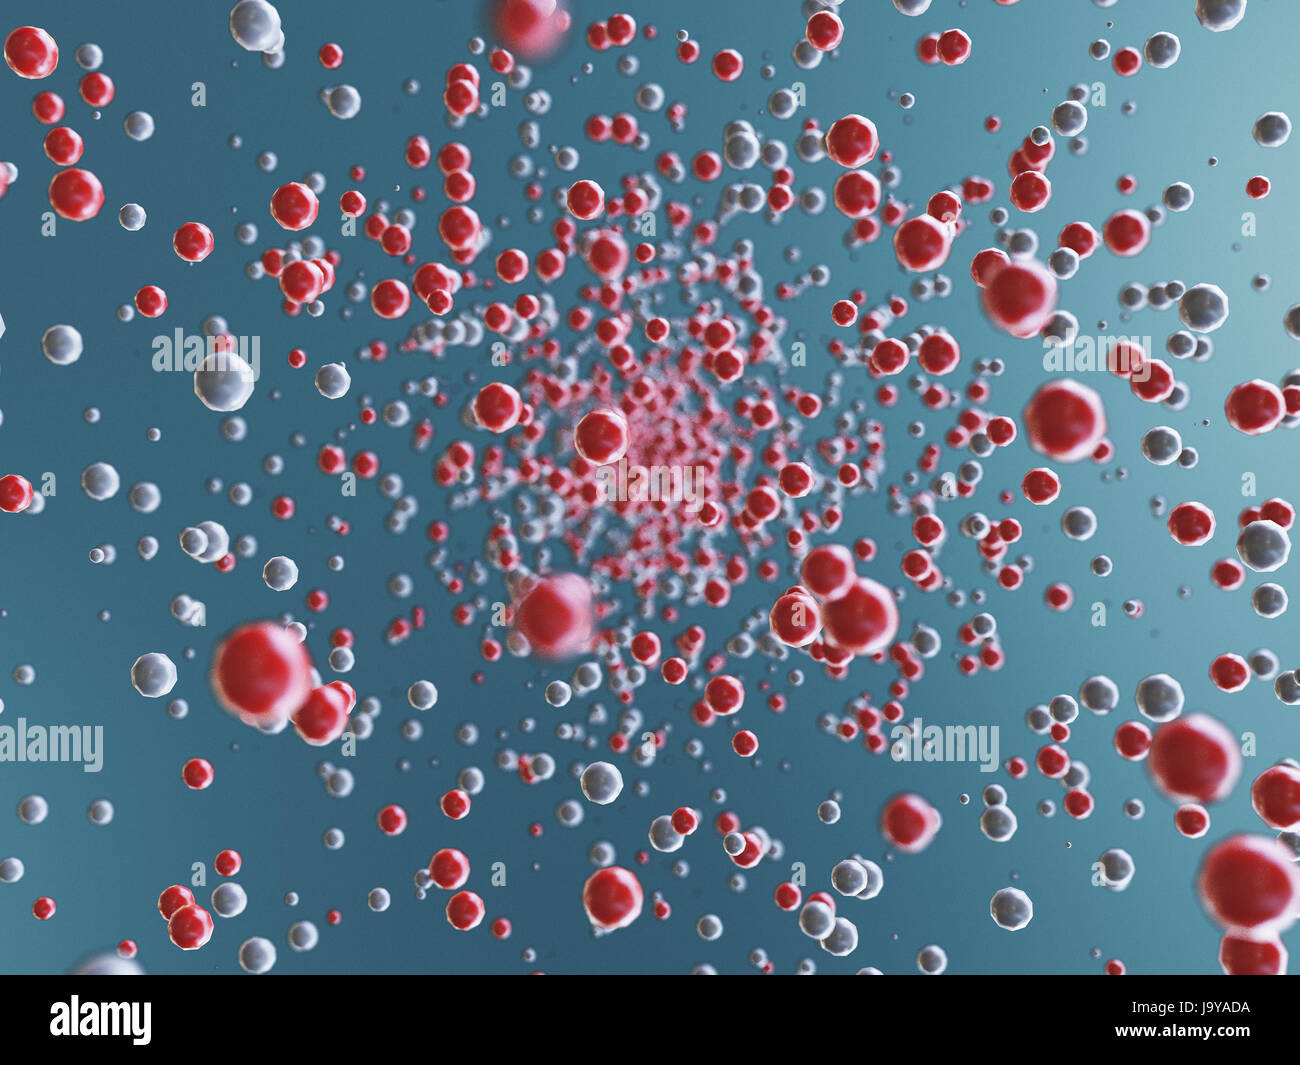 Bubbles, molecules or blood cells, render Stock Photo